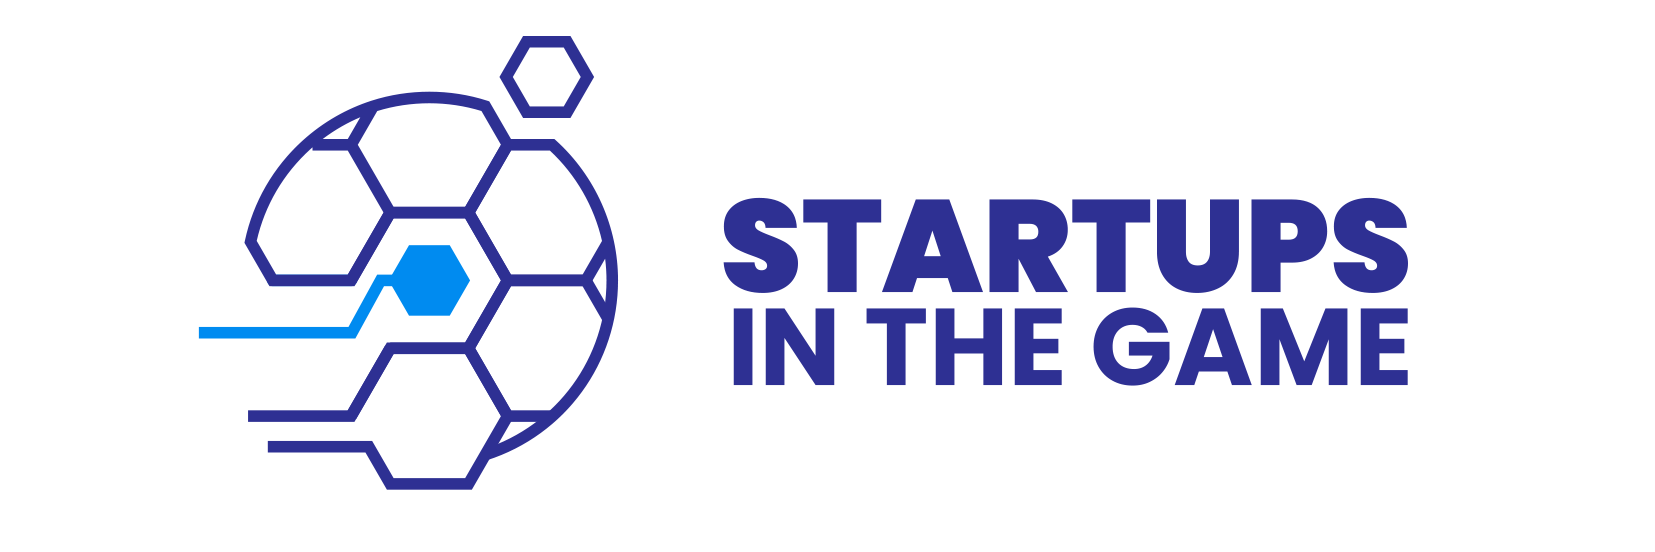 Startups in the game logo